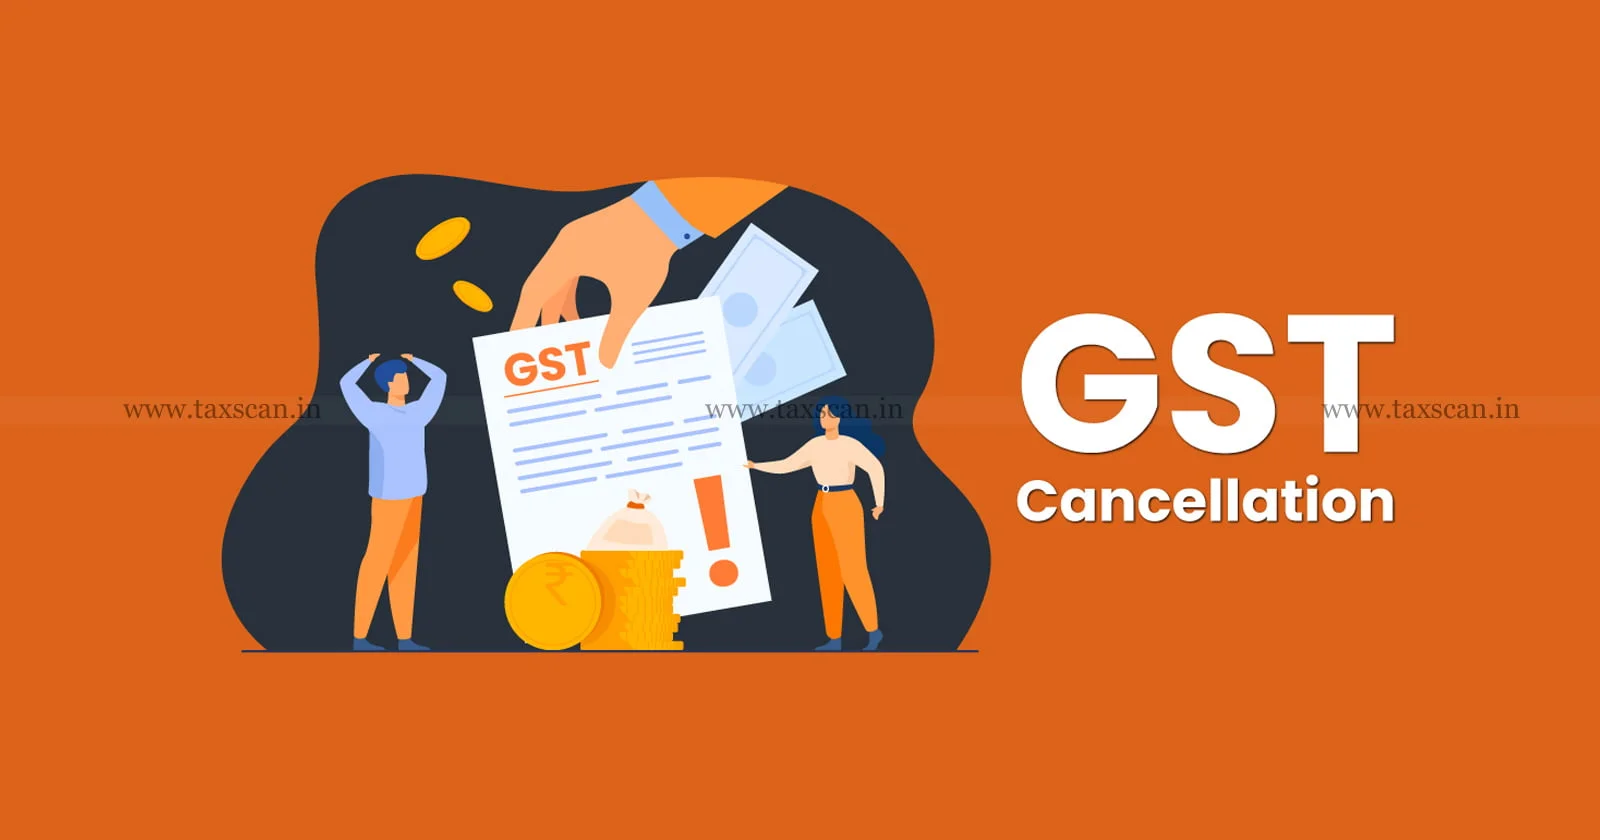 income tax credit - Goods and Service Tax - Cancellation of GST - TAXSCAN